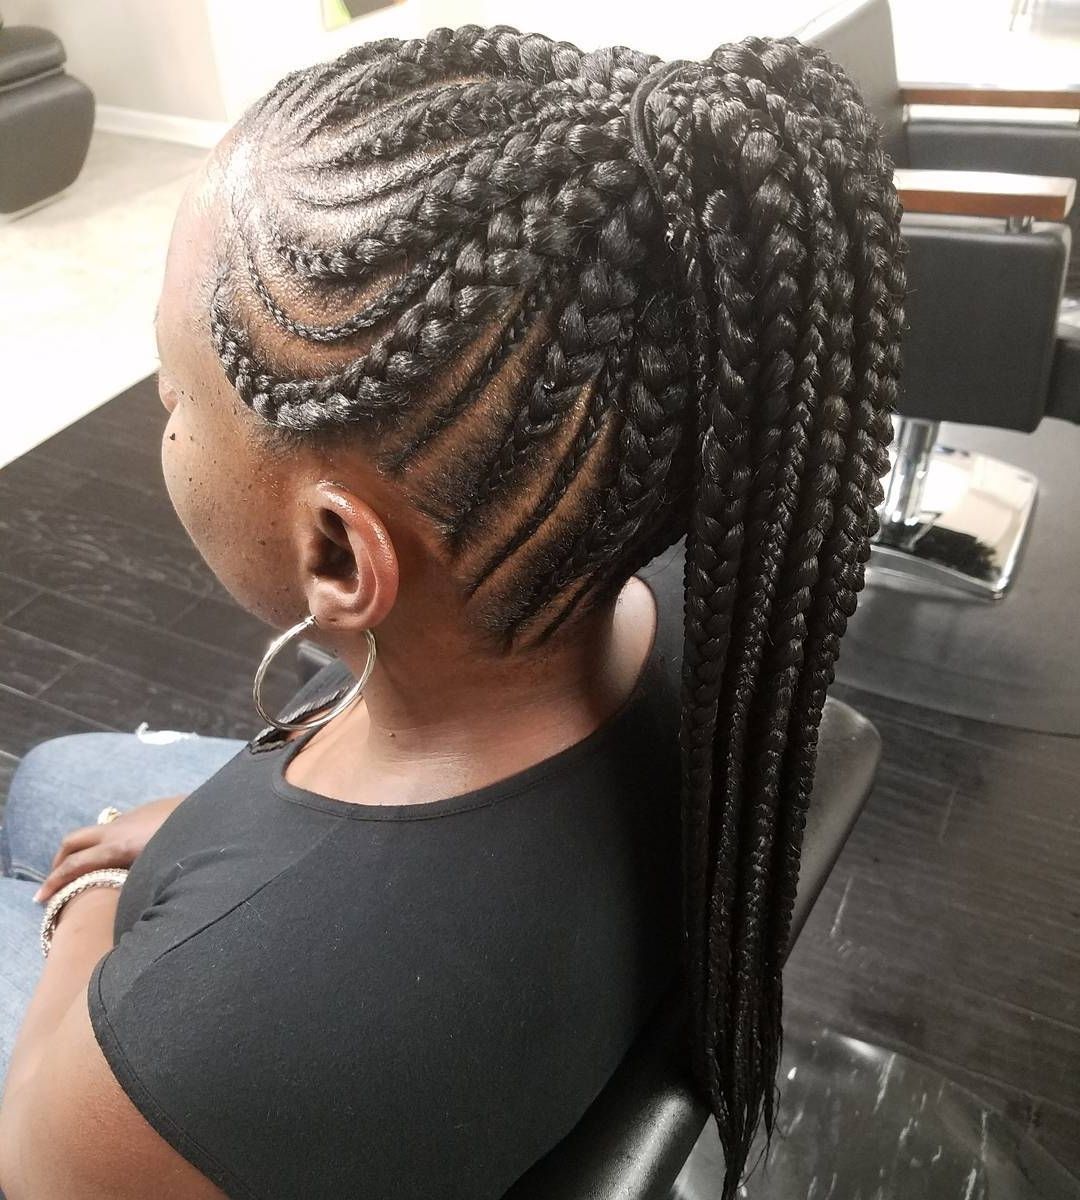 Most Recent Two Quick Braids And Ponytail Inside 20 Gorgeous Ghana Braids For An Intricate Hairdo In  (View 15 of 15)